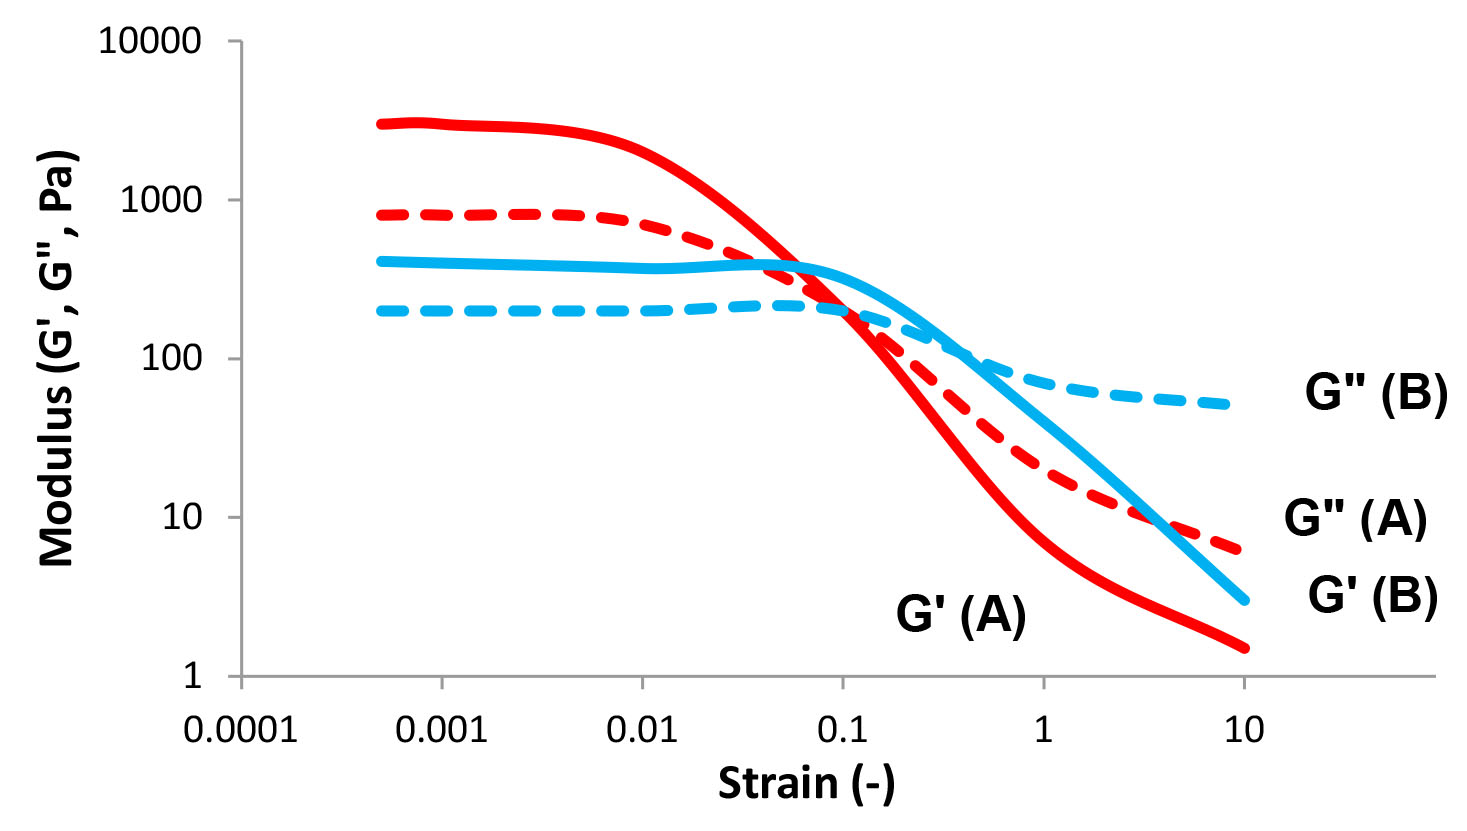 Strain sweep – storage (G') and loss (G") moduli as a function of strain at a constant frequency